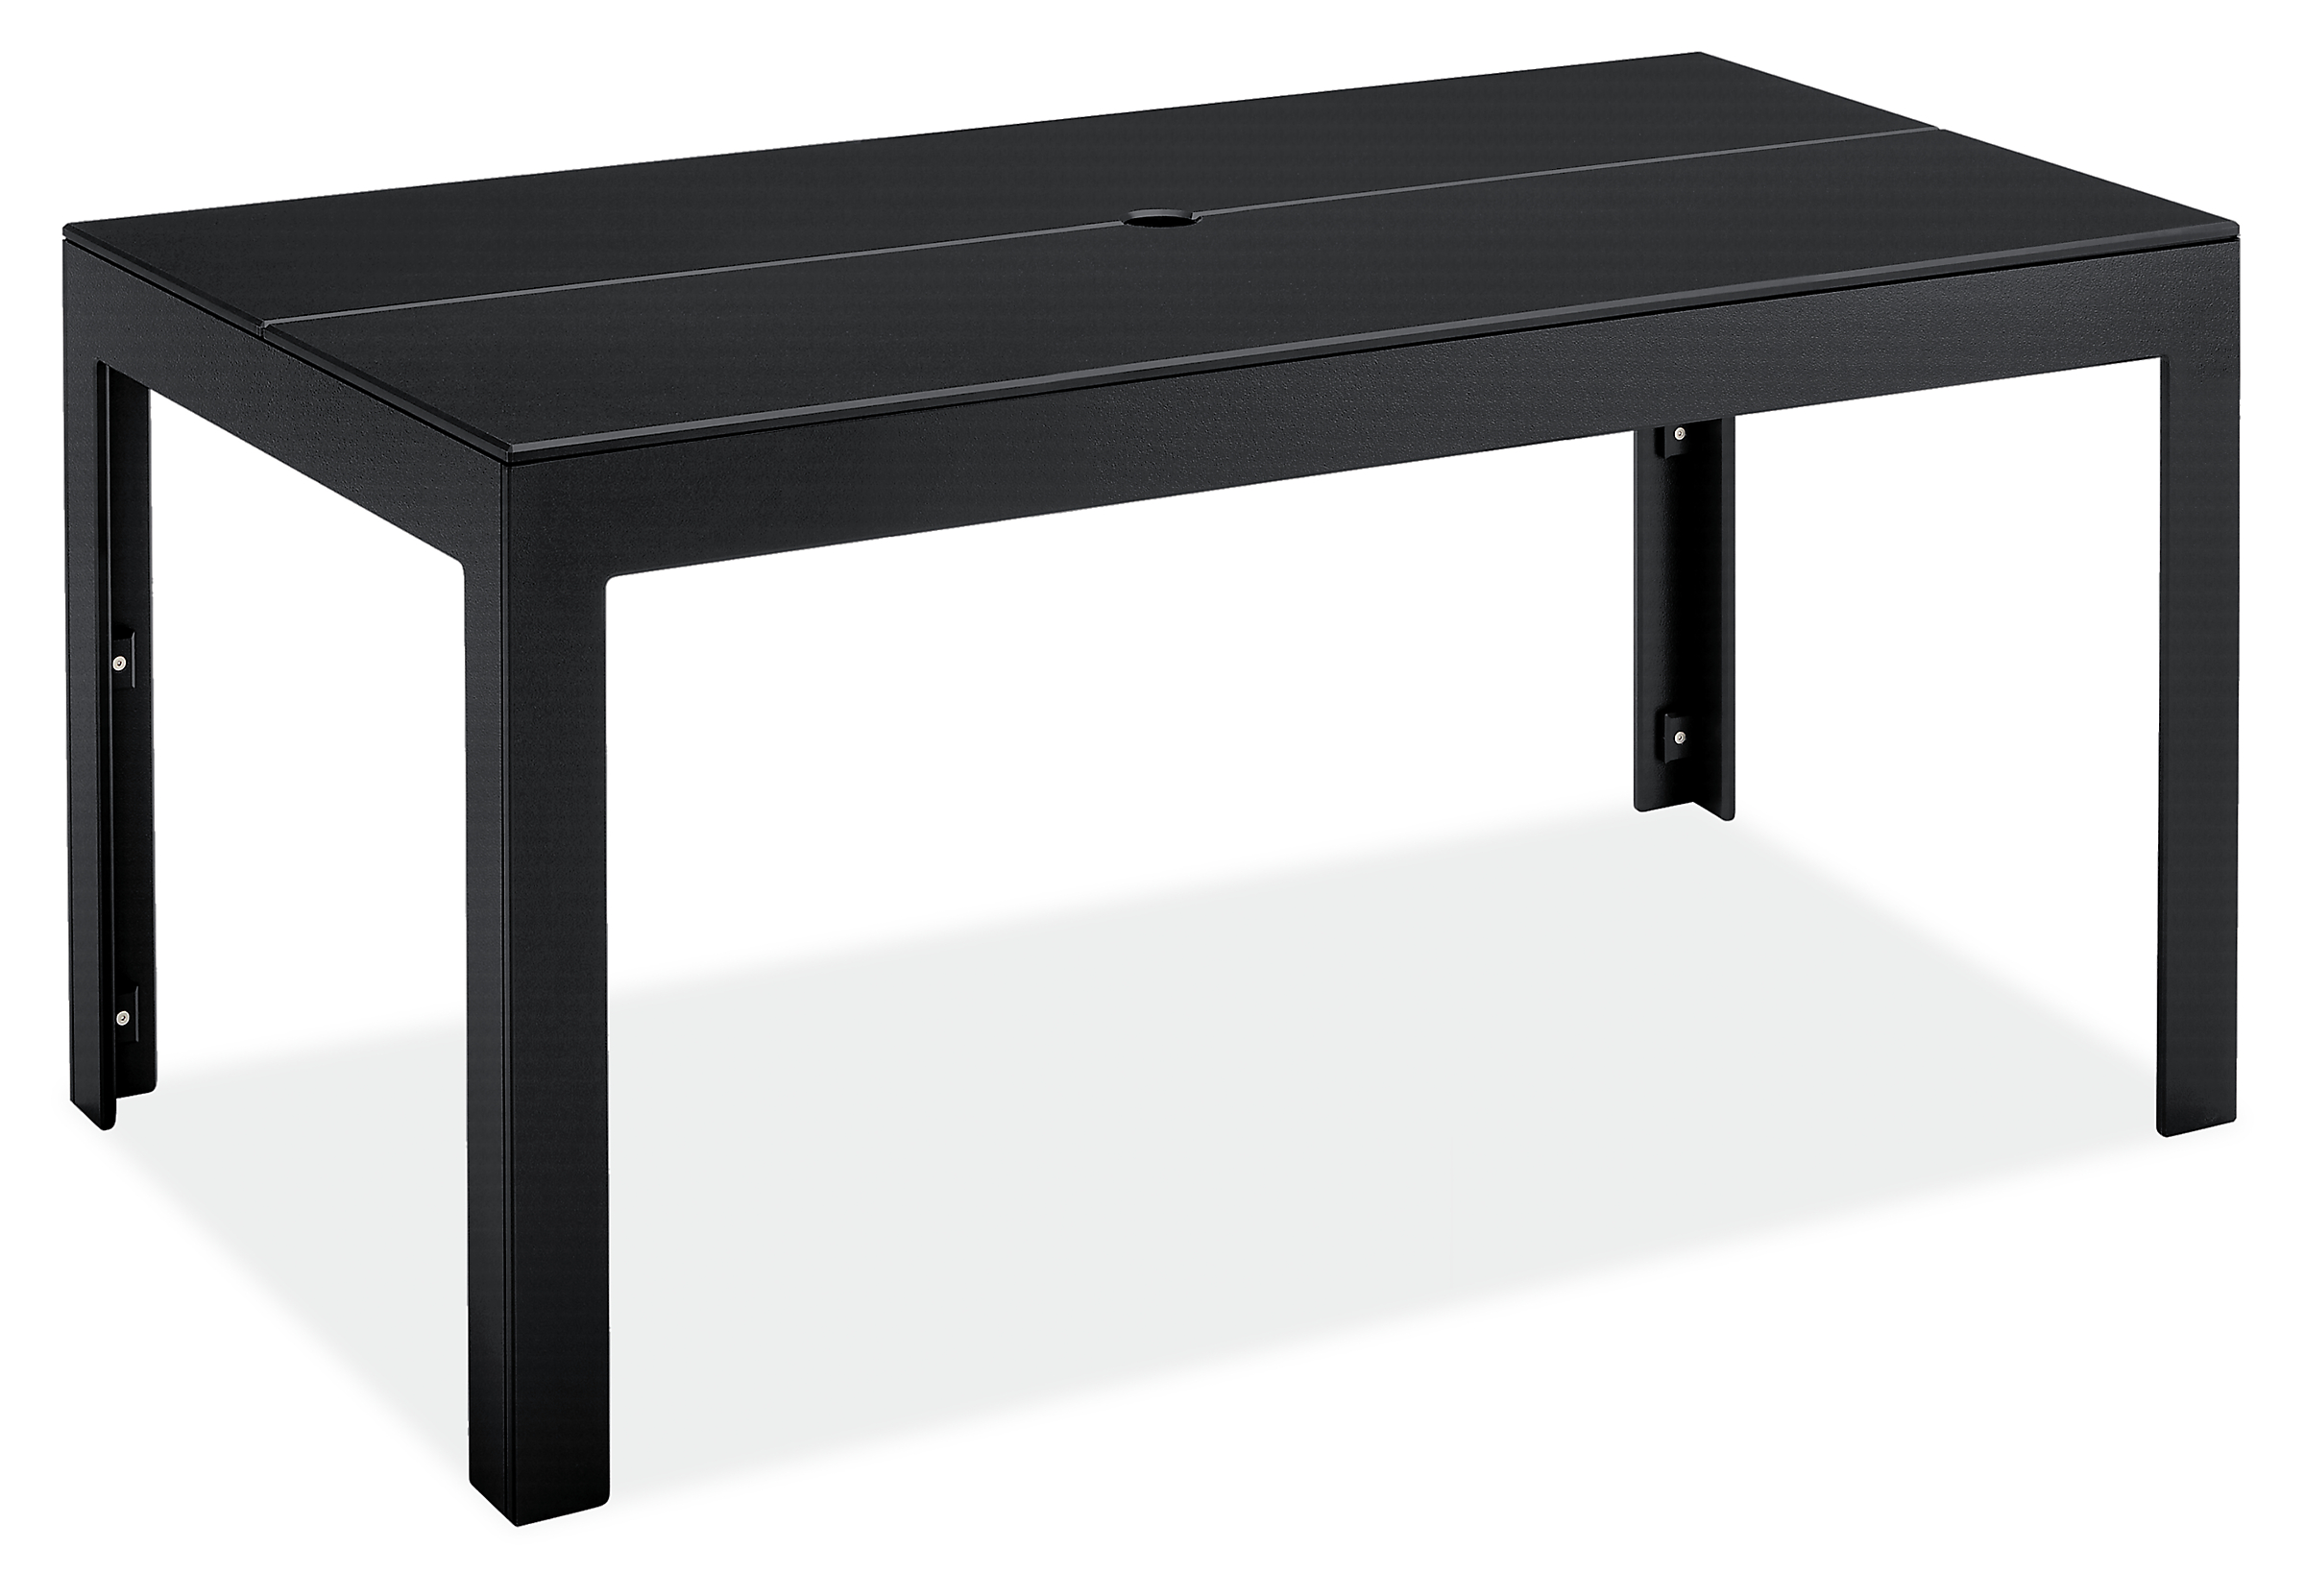 Henry 60w 36d 30h Table with Umbrella Hole in Black